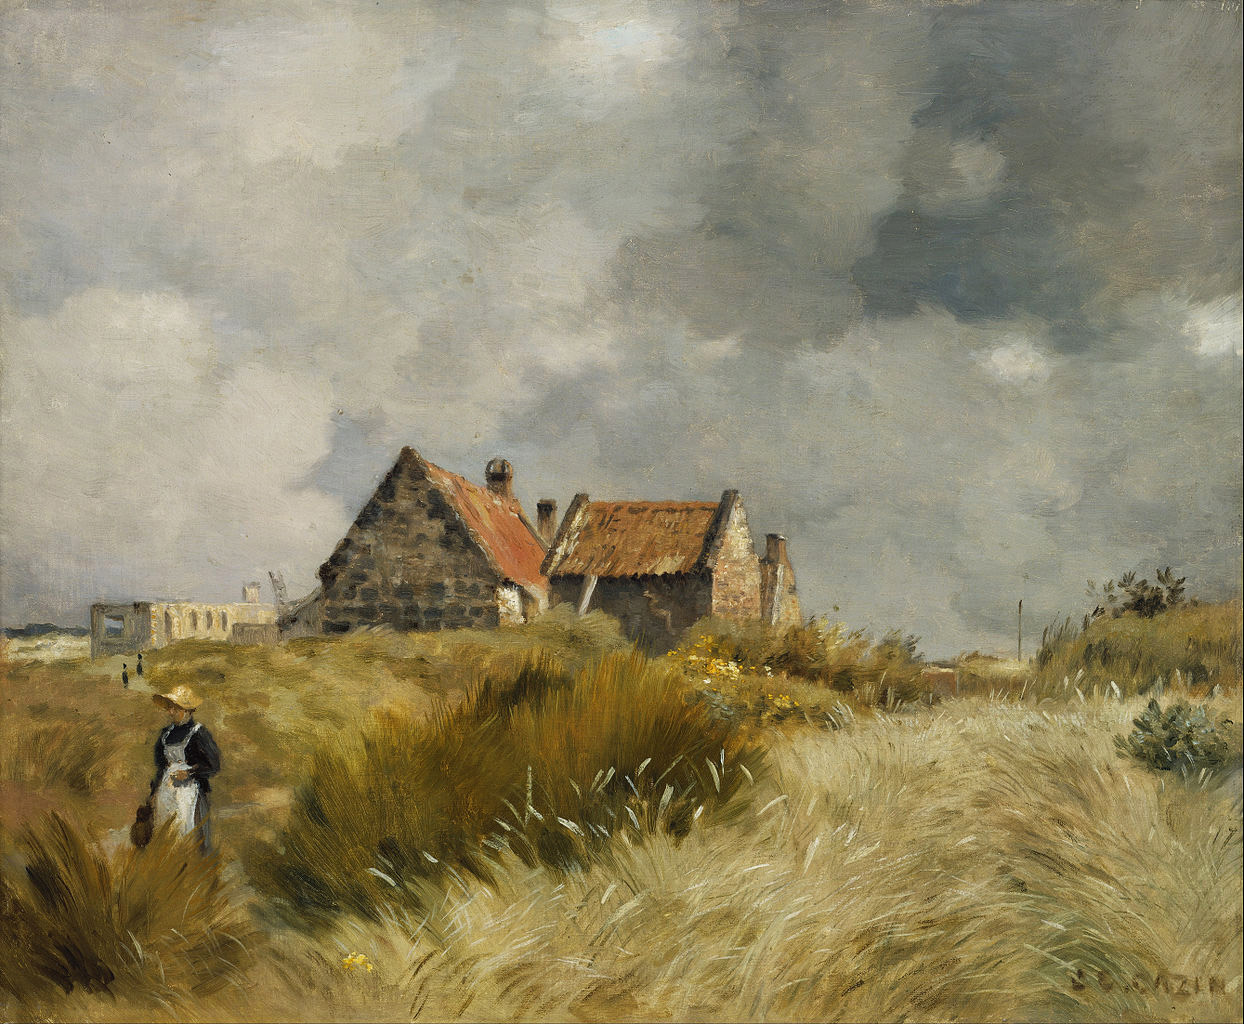 Cottage in the dunes